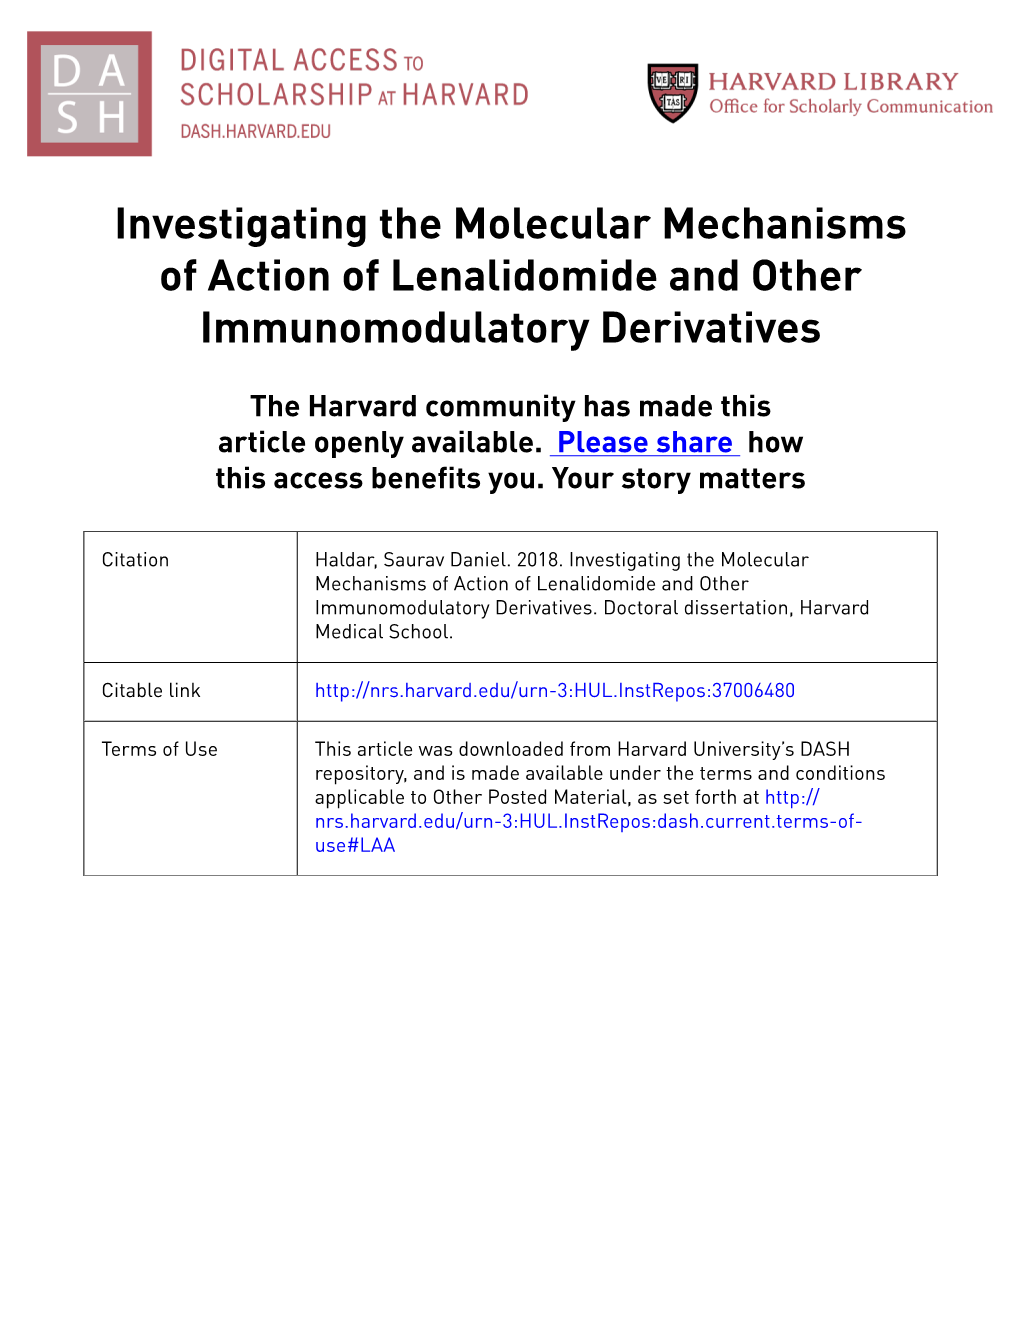 Investigating the Molecular Mechanisms of Action of Lenalidomide and Other Immunomodulatory Derivatives